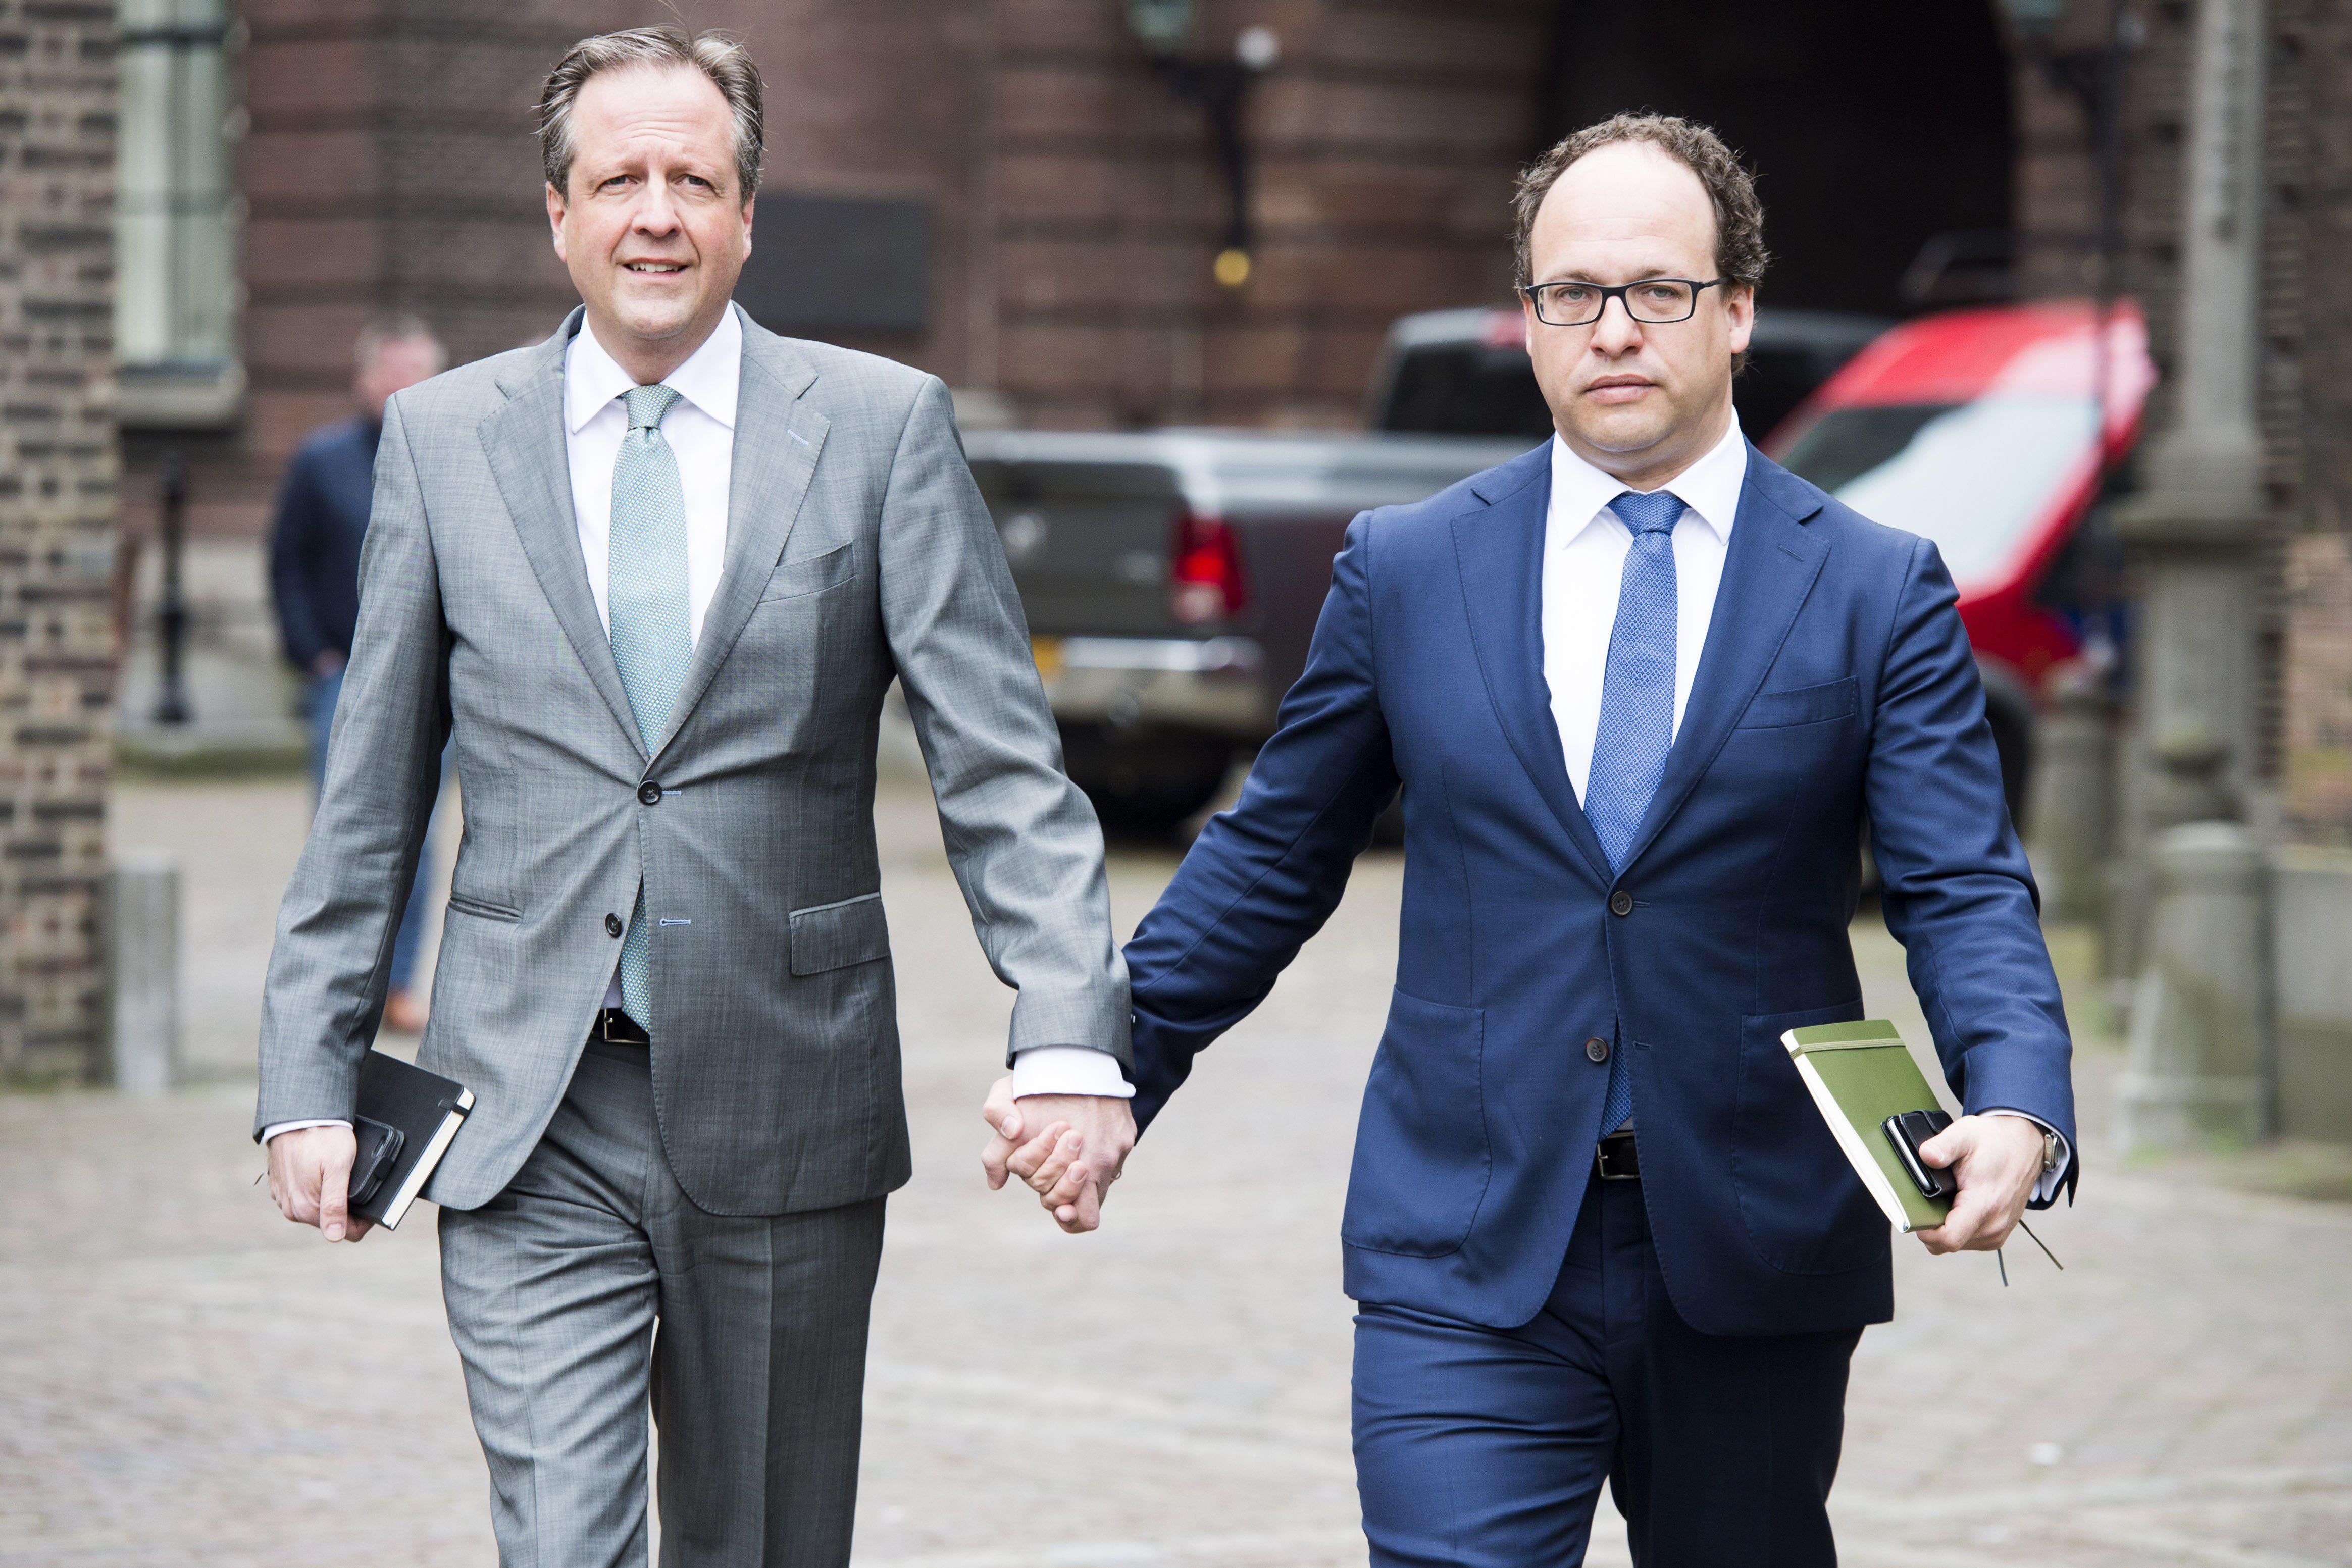 Dutch Men Across The World Hold Hands To Support Attacked Gay Couple Cbs News